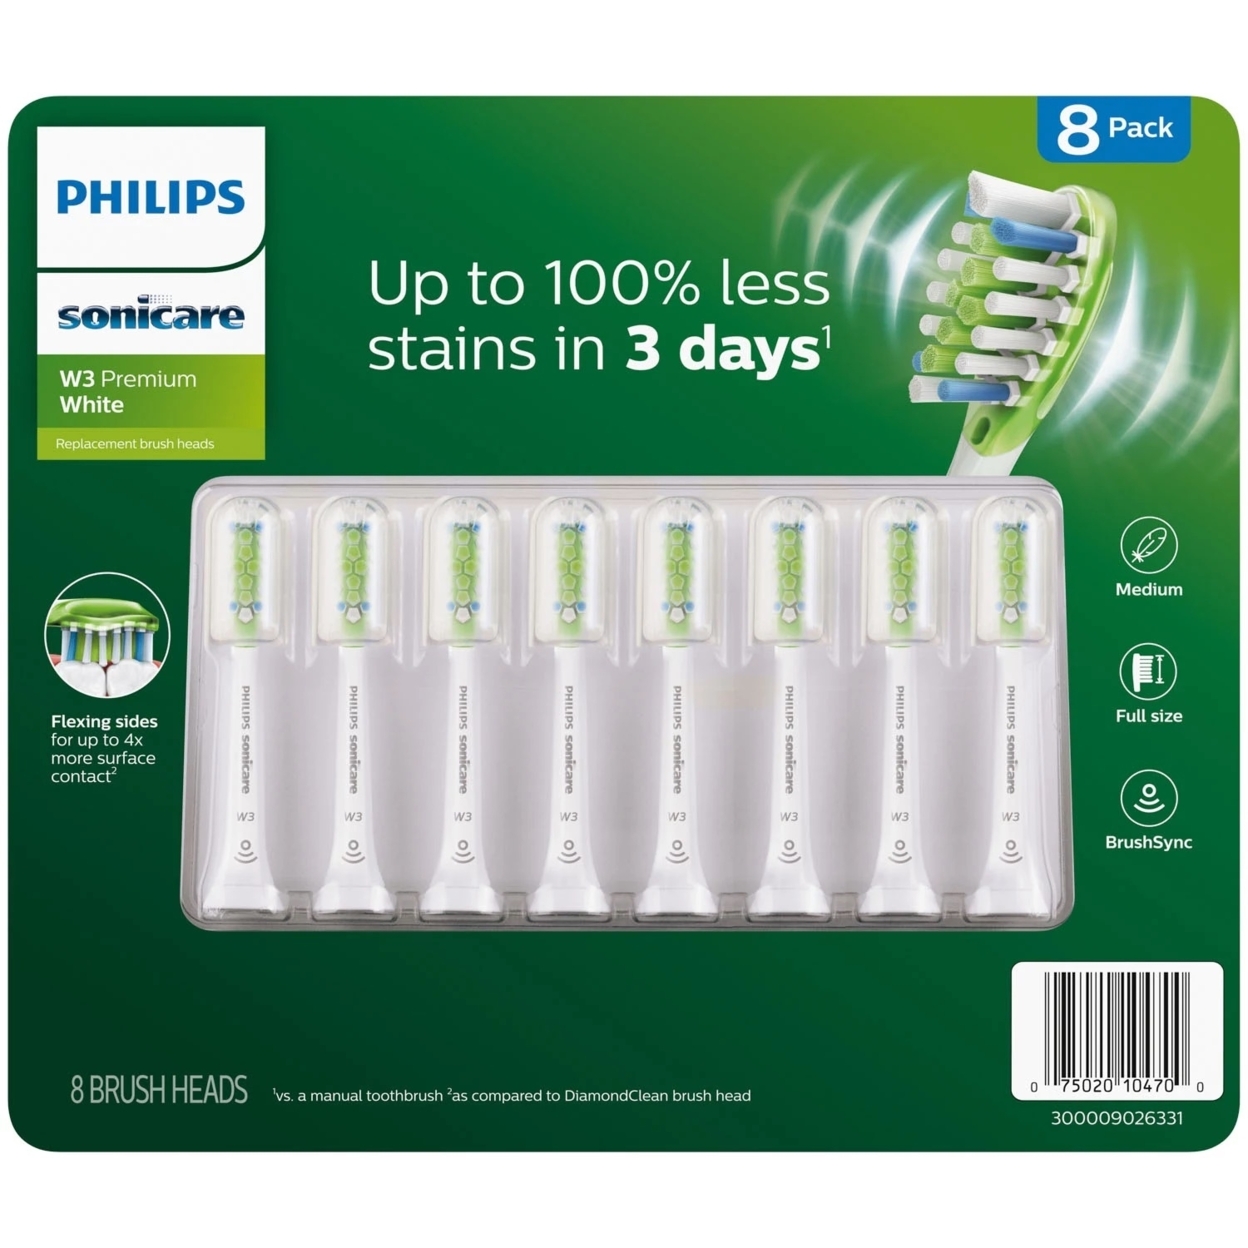 Philips Sonicare W3 Premium White Replacement Brush Heads (8 Count)